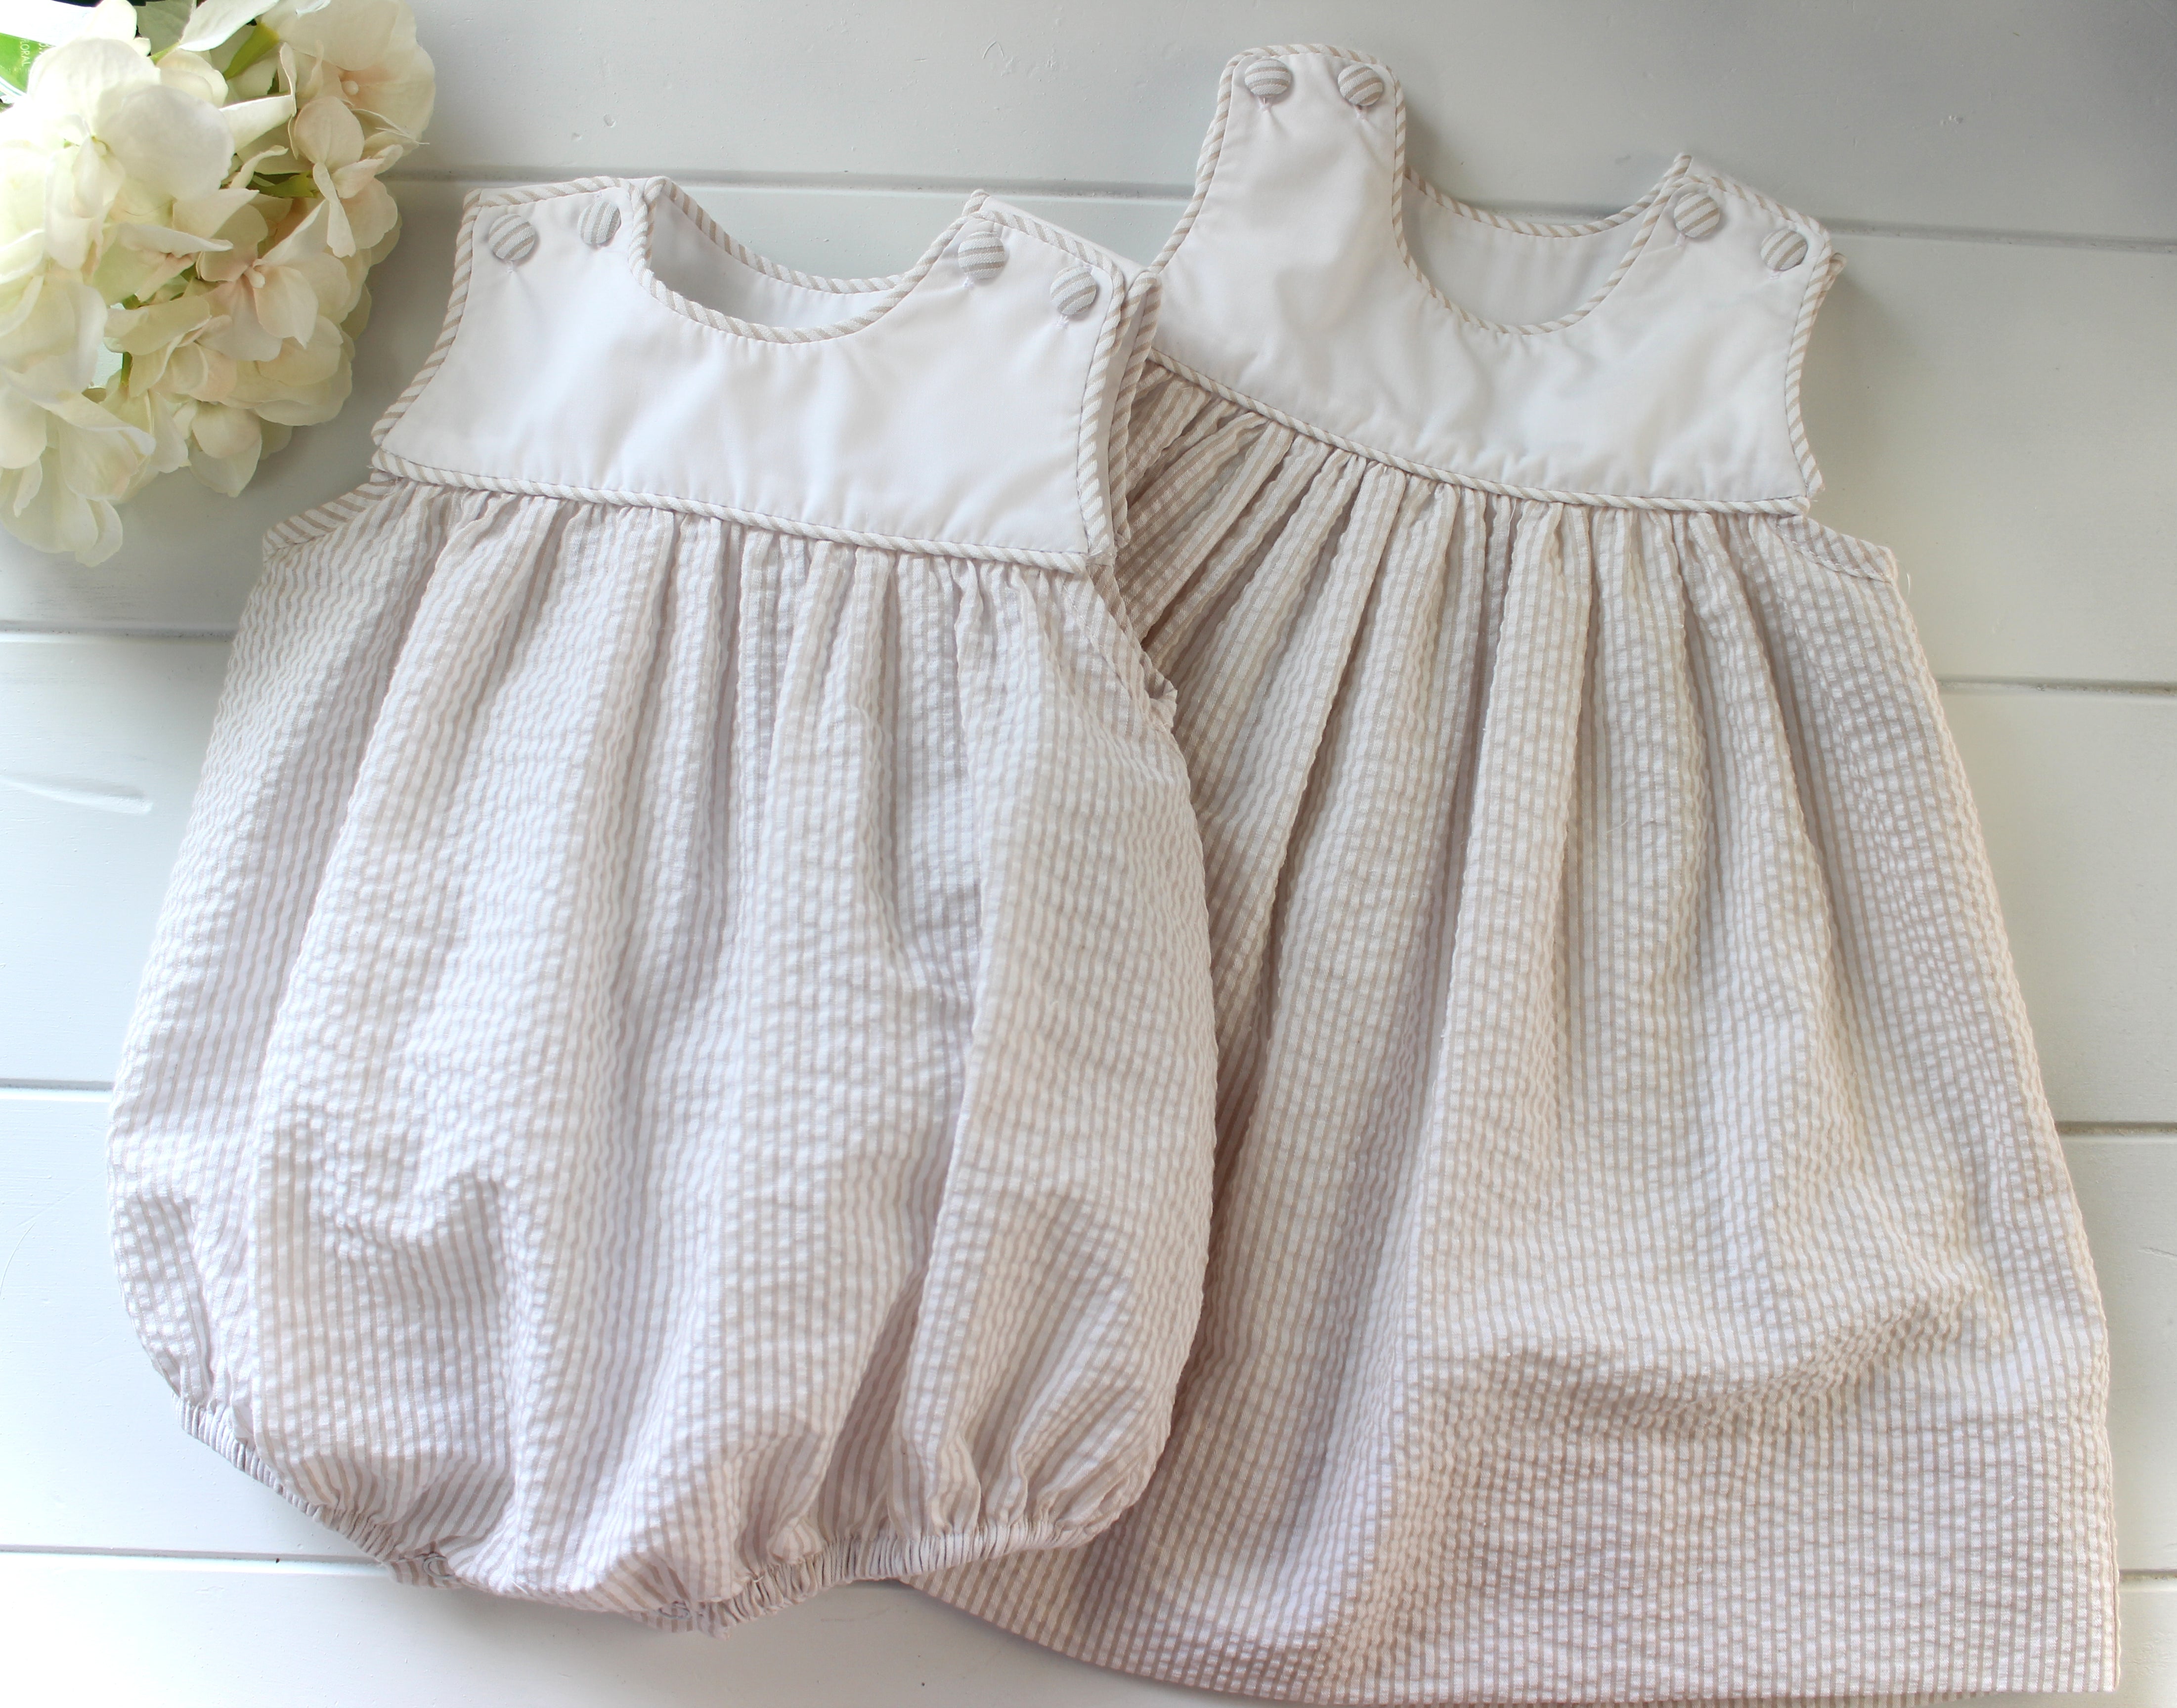 Chic Cotton Princess Communion Dresses For Girls Perfect For Summer  Weddings, Beach Parties, And More! From Sihuai04, $11.86 | DHgate.Com